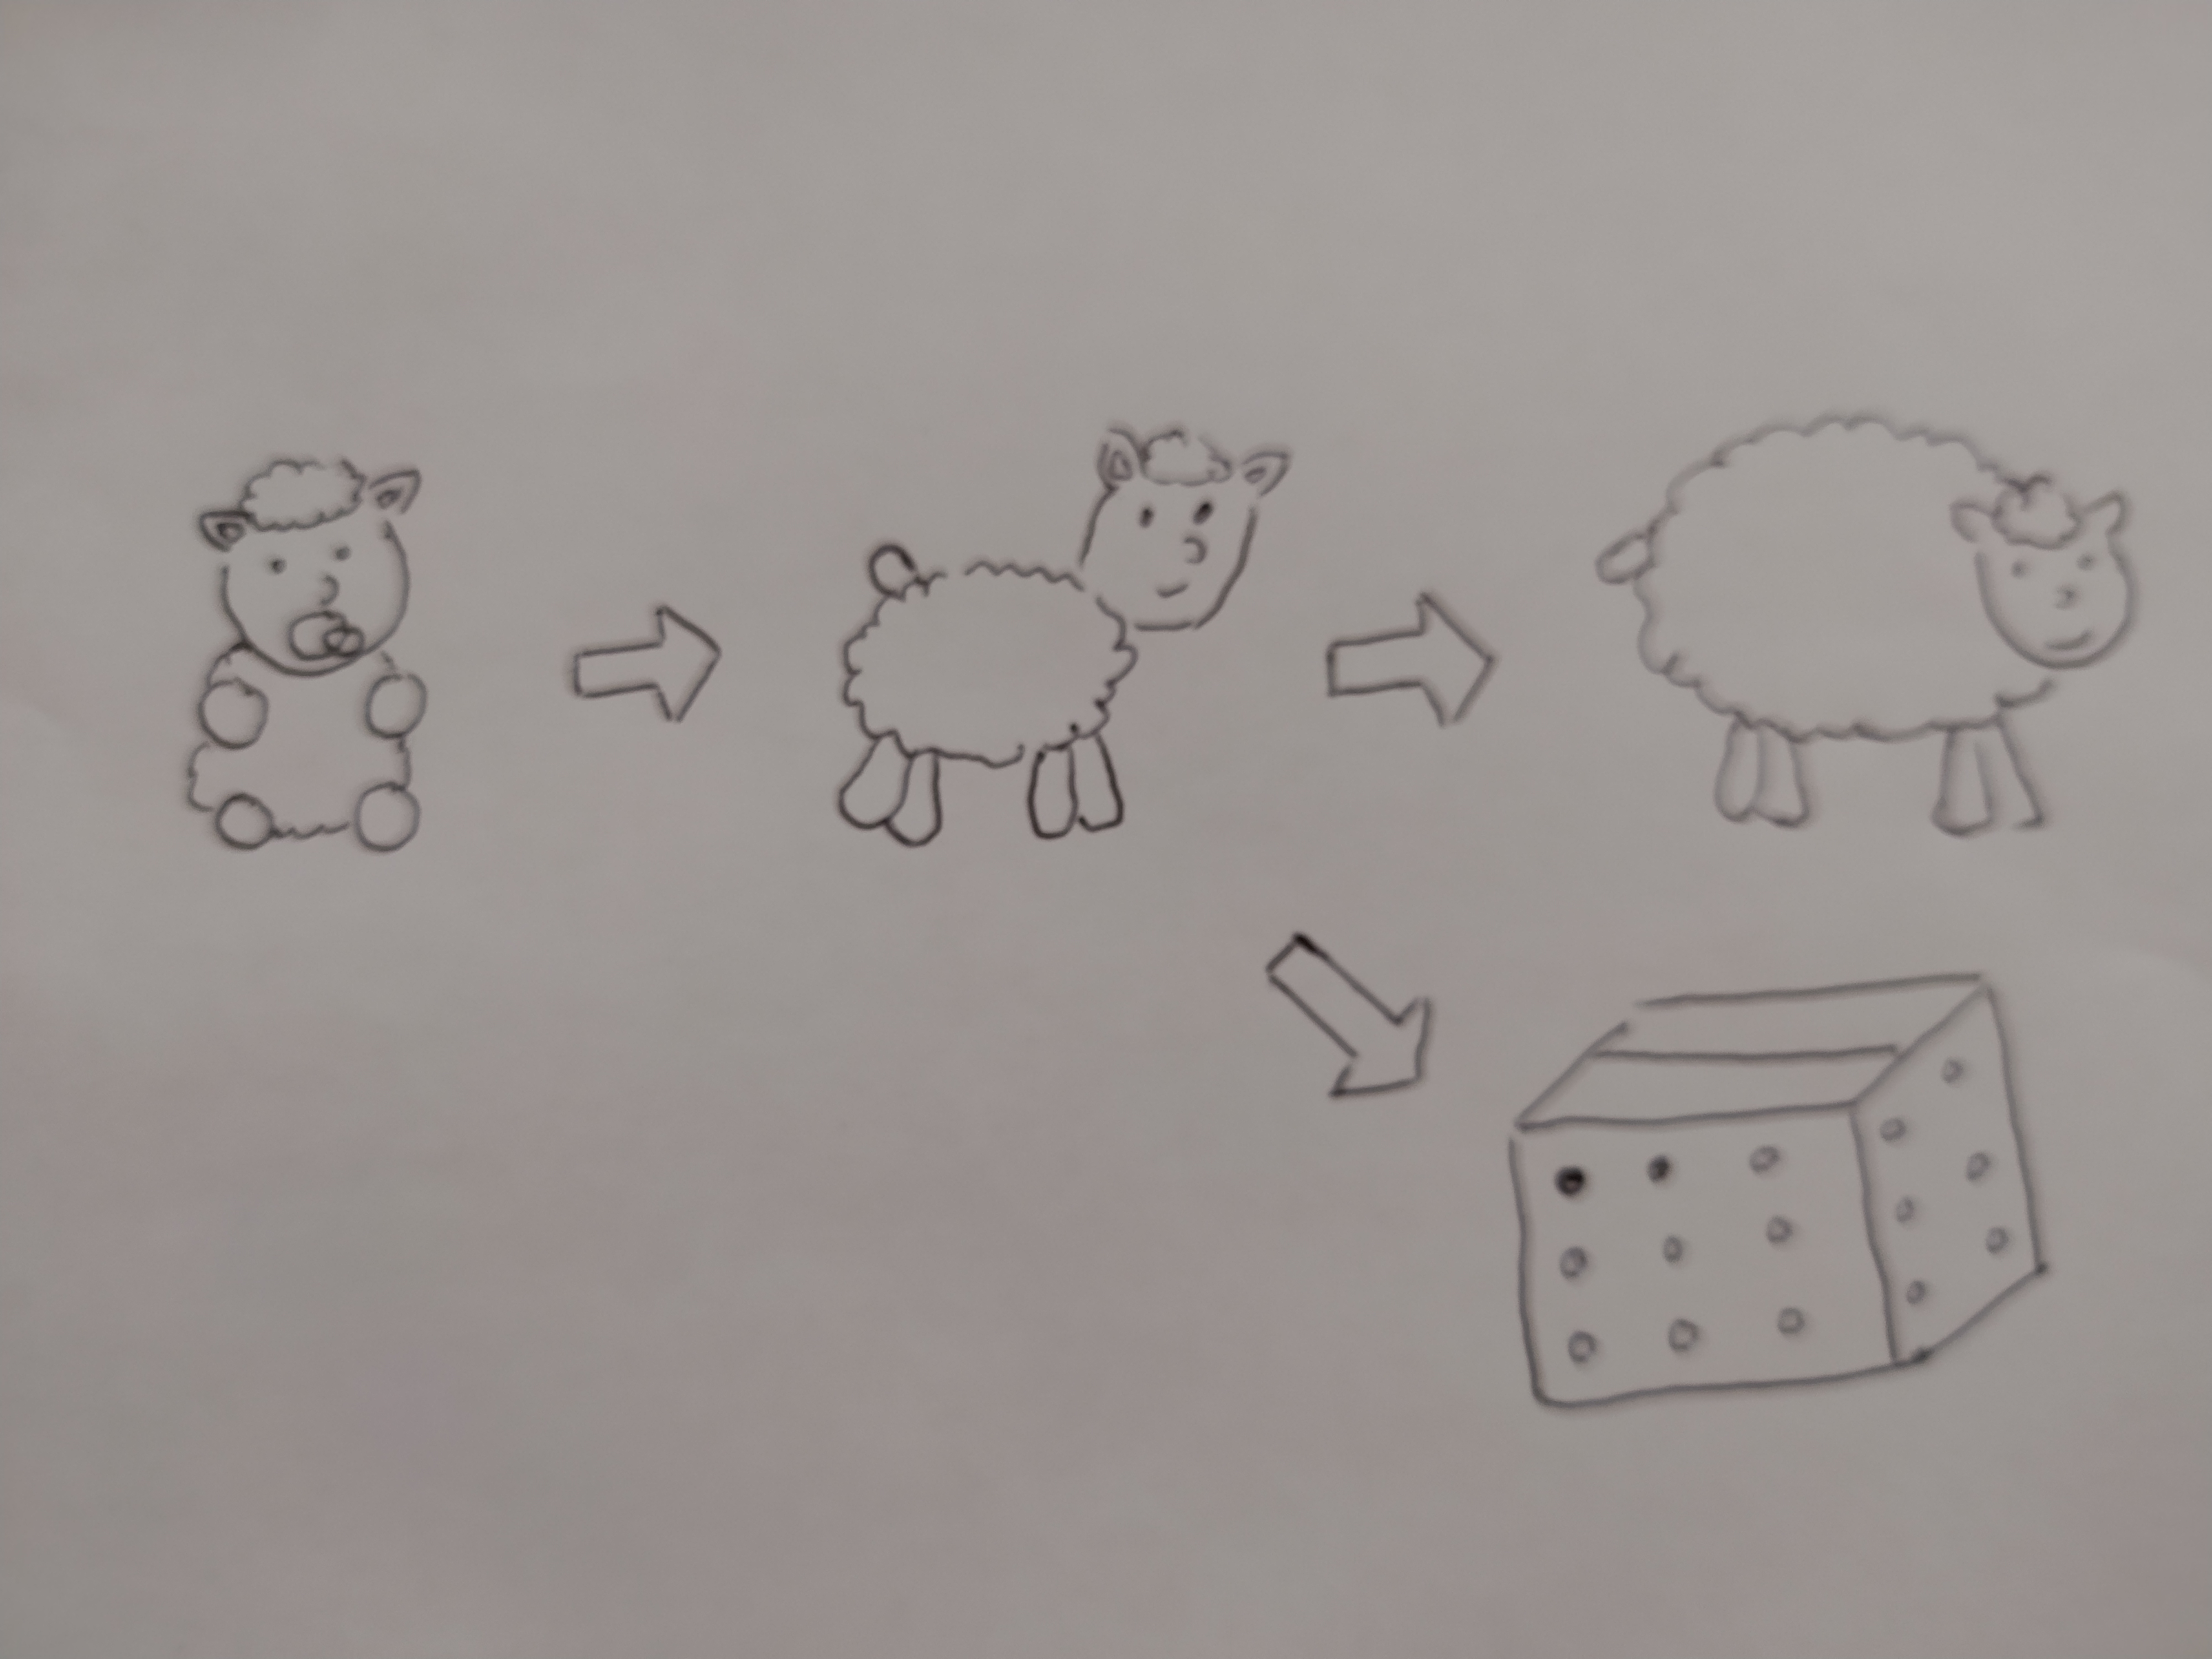 Drawing showing several versions of a sheep, from baby sheep to adult sheep, with arrows from left to right. The middle sheep can also evolve to a box with holes.